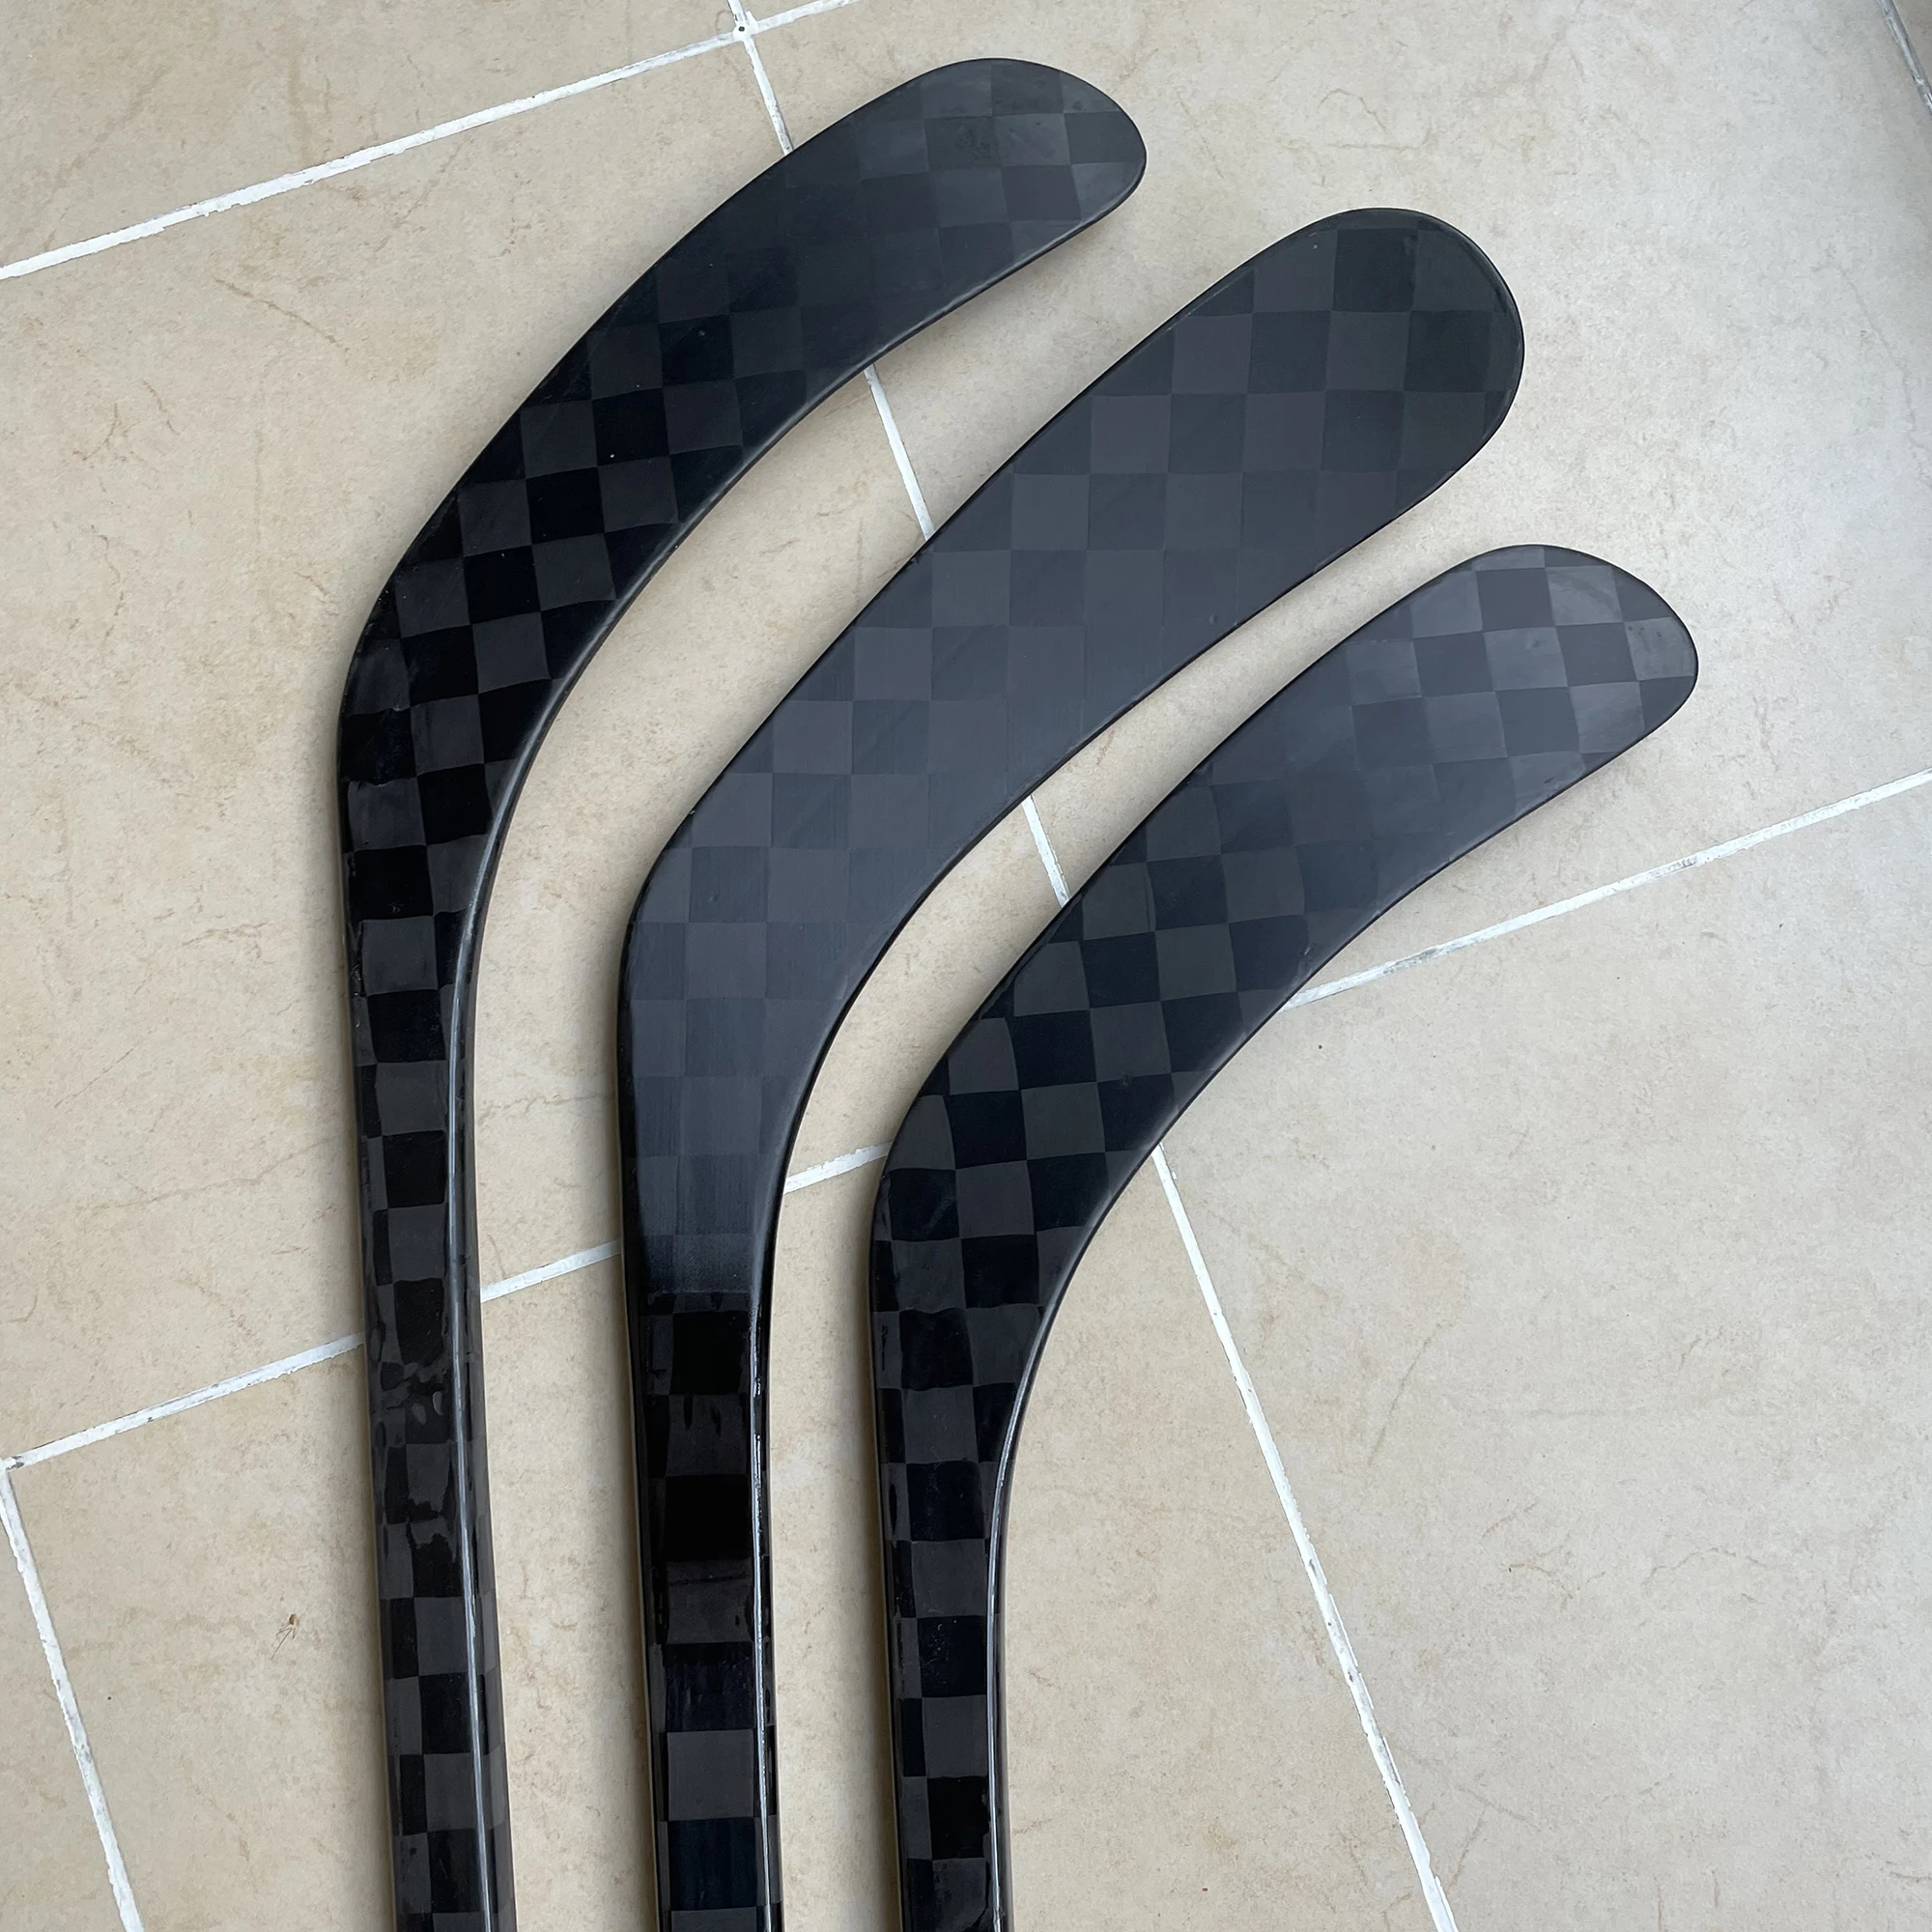 

Hot sales high quality one piece model icehockey sticks made in china, Customized color